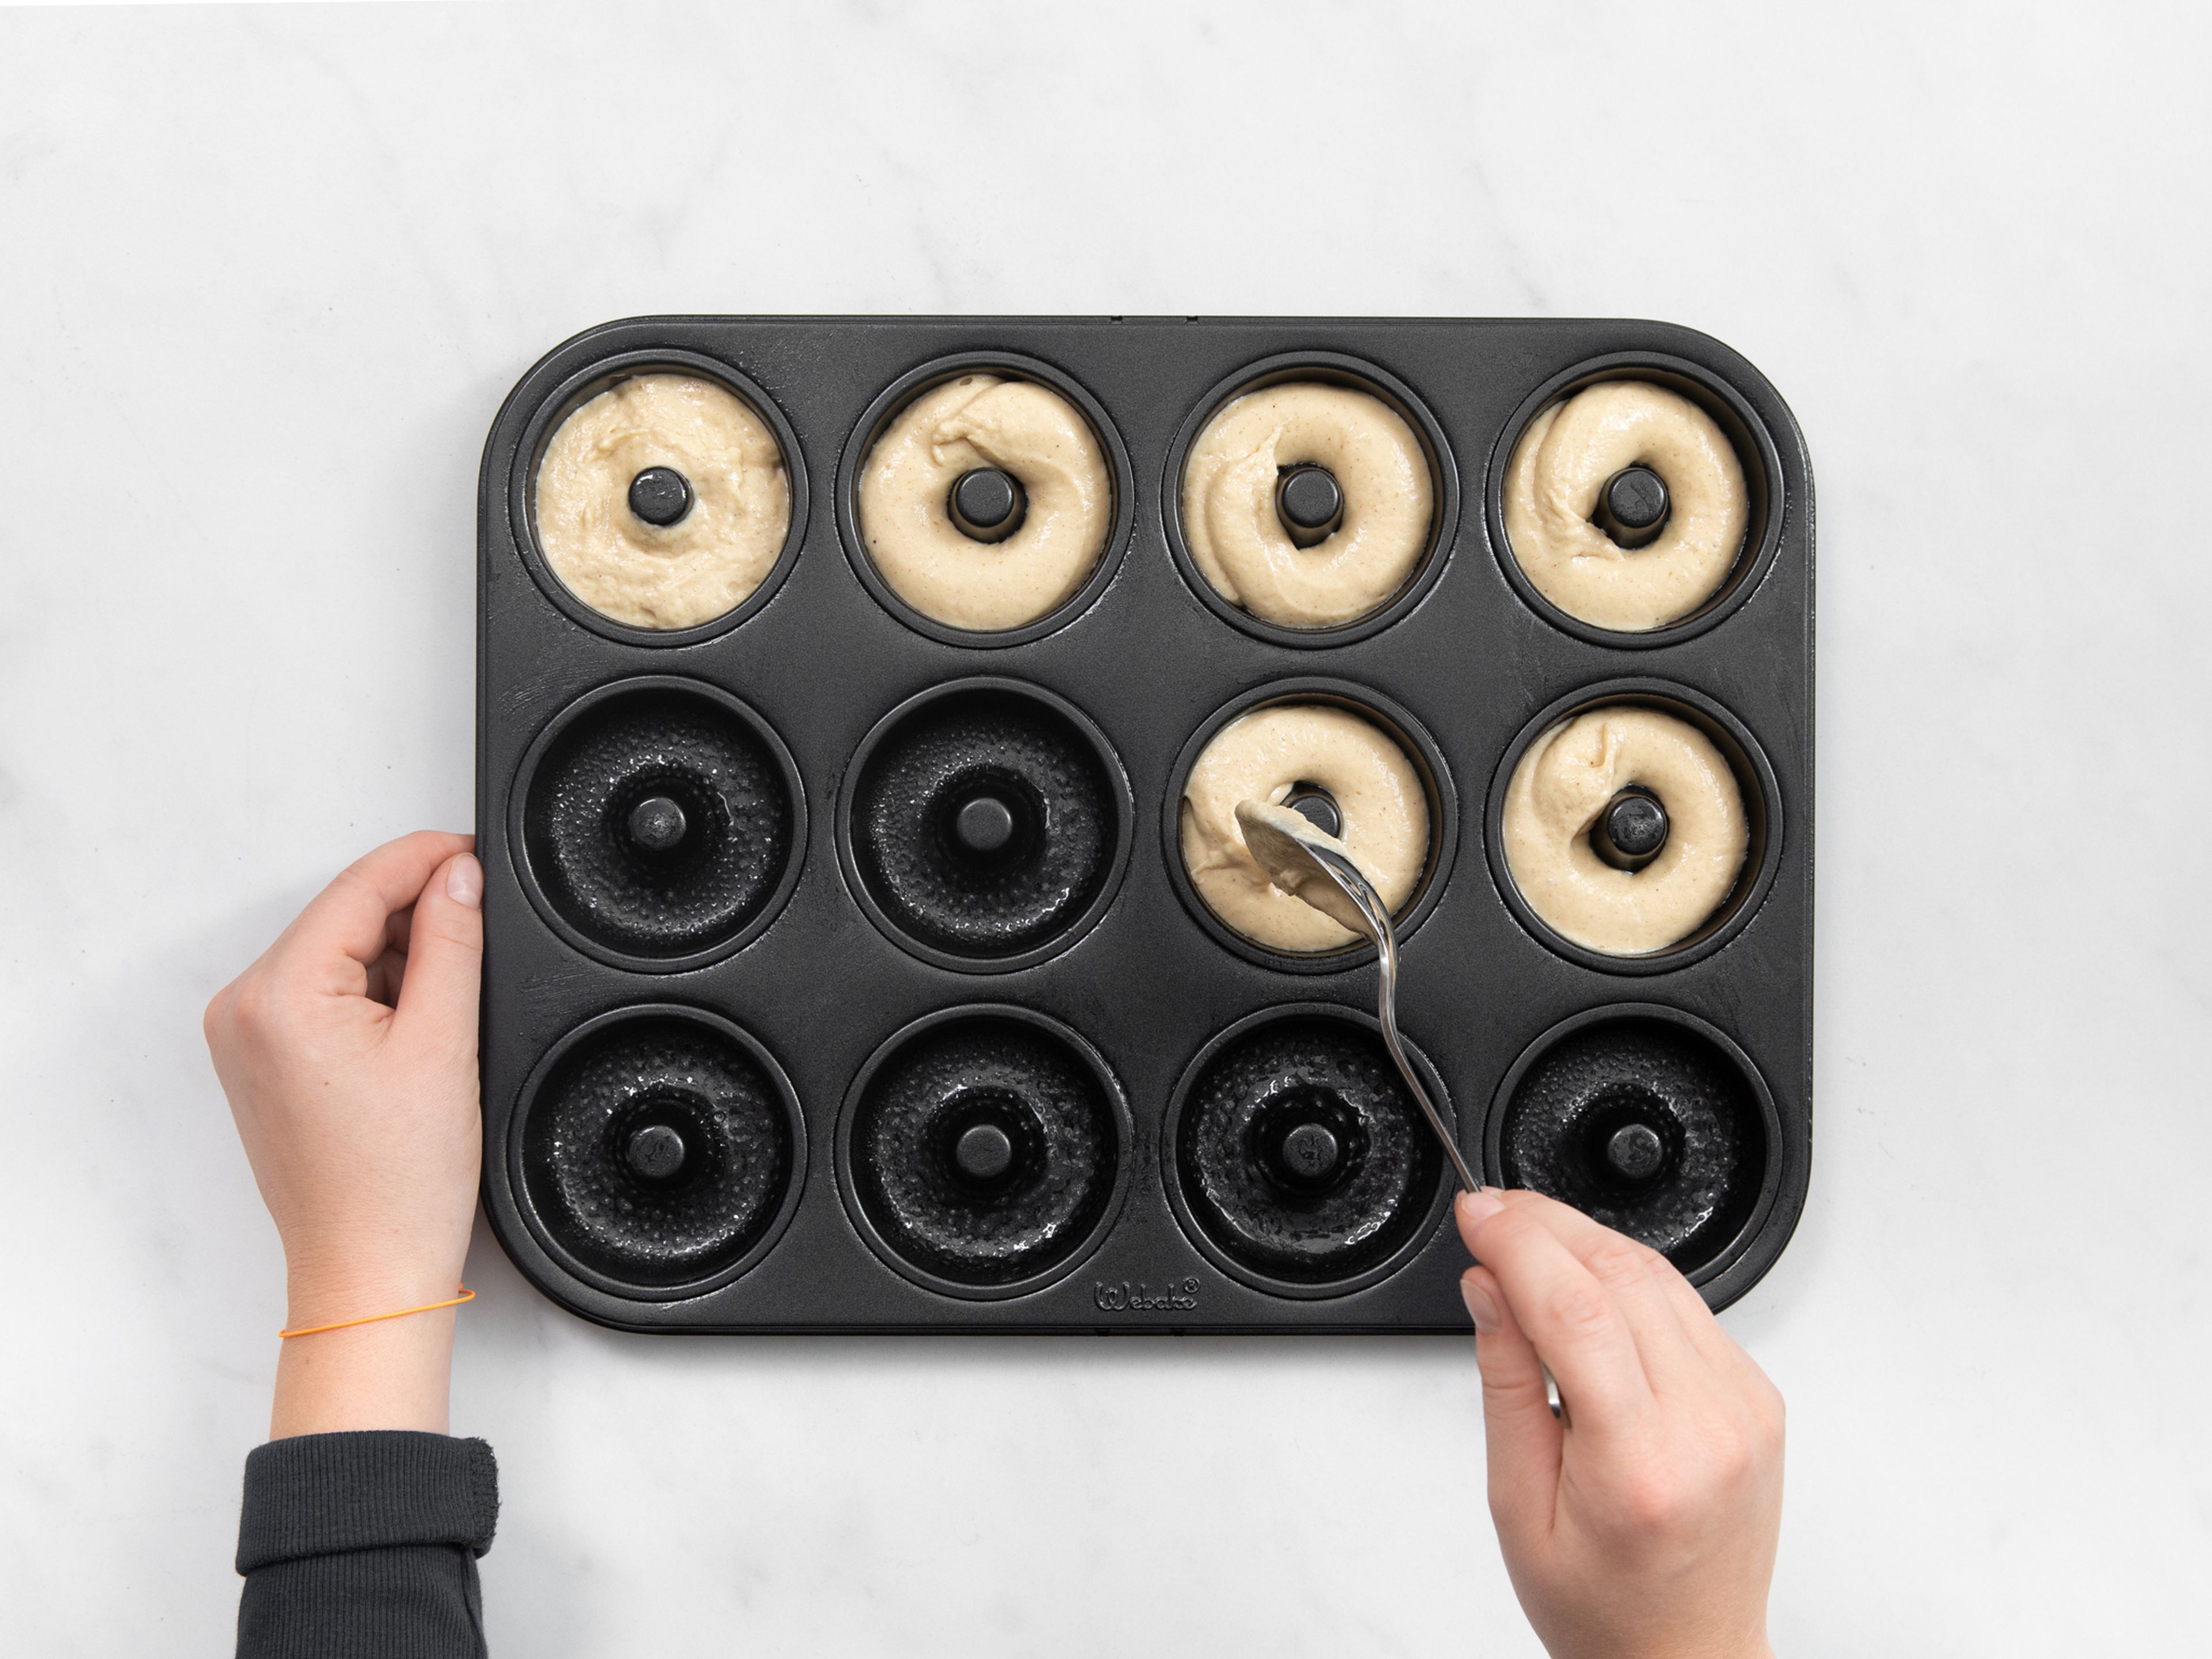 Use a spoon to drop spoonfuls of batter into a greased doughnut pan. Smooth the tops, leaving about 1/4-inch at the top of each well. Bake for about 10 min., then let cool for at least 5 min. before inverting the pan and gently tapping out the doughnuts onto a cooling rack.